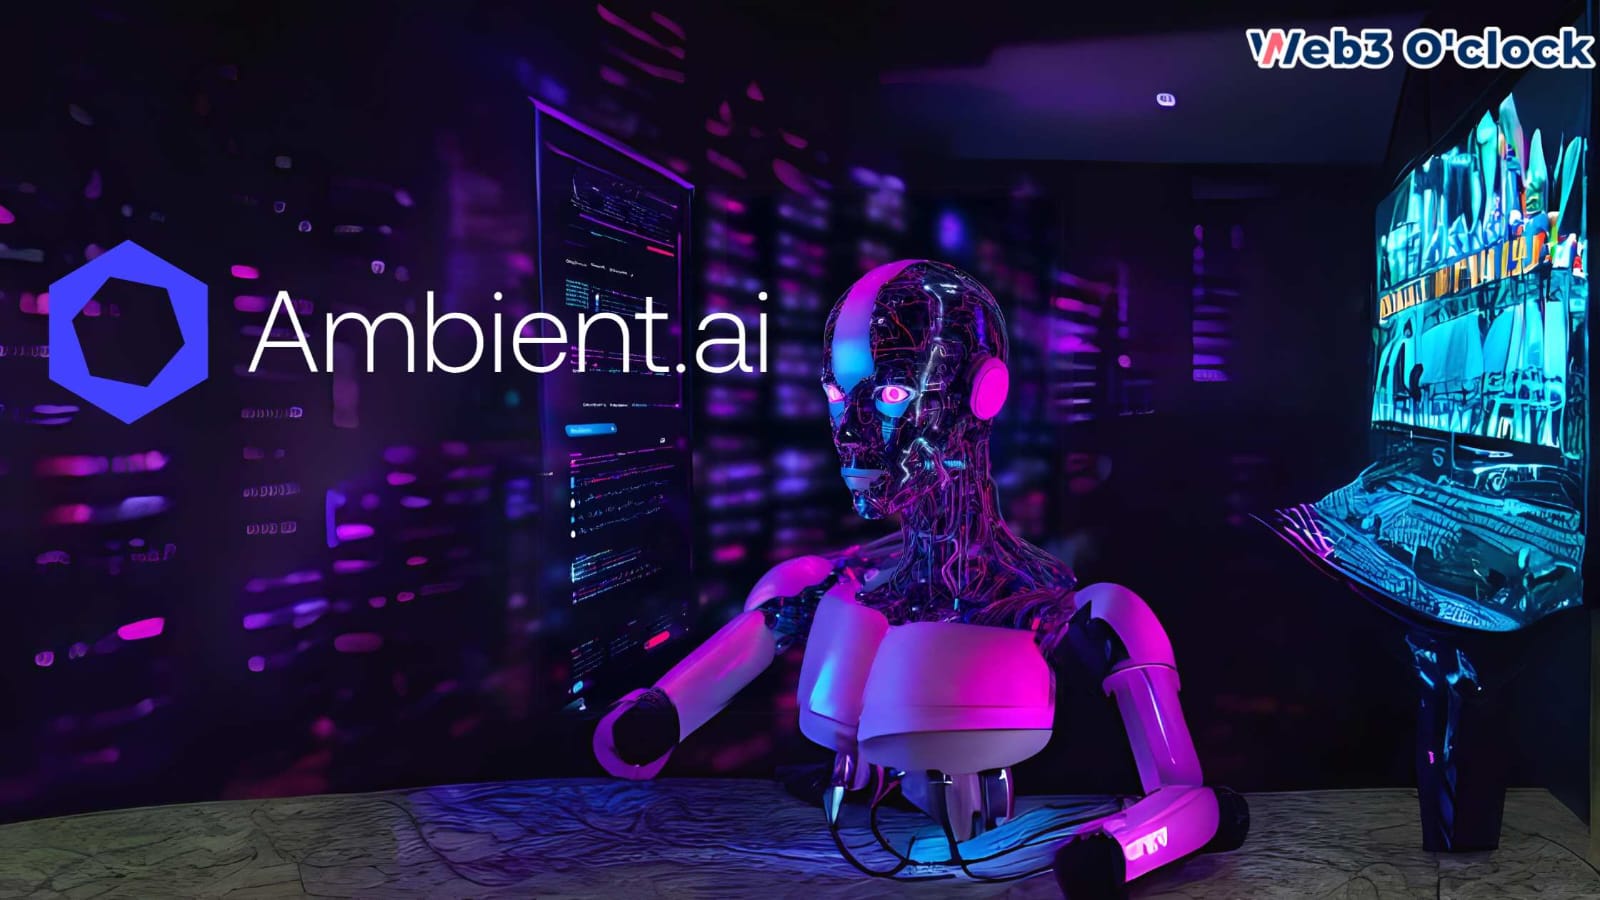 Ambient.ai Secures $20M by web3oclock